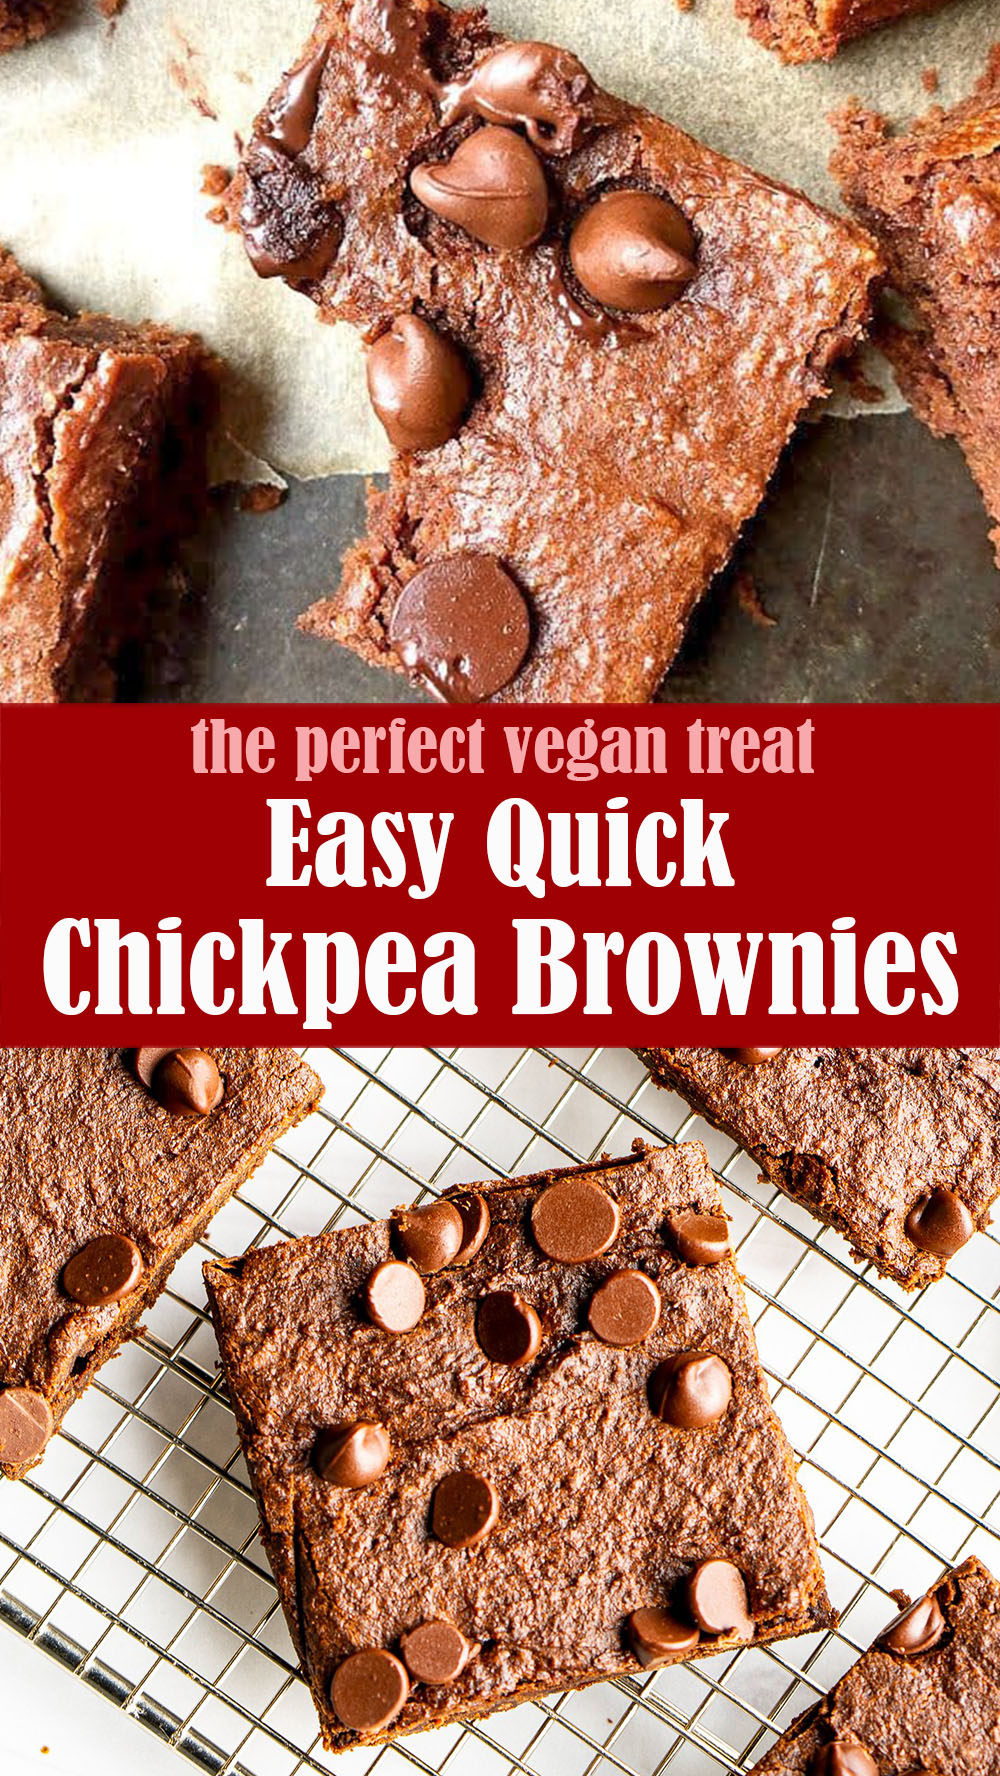 Easy Quick Chickpea Brownies